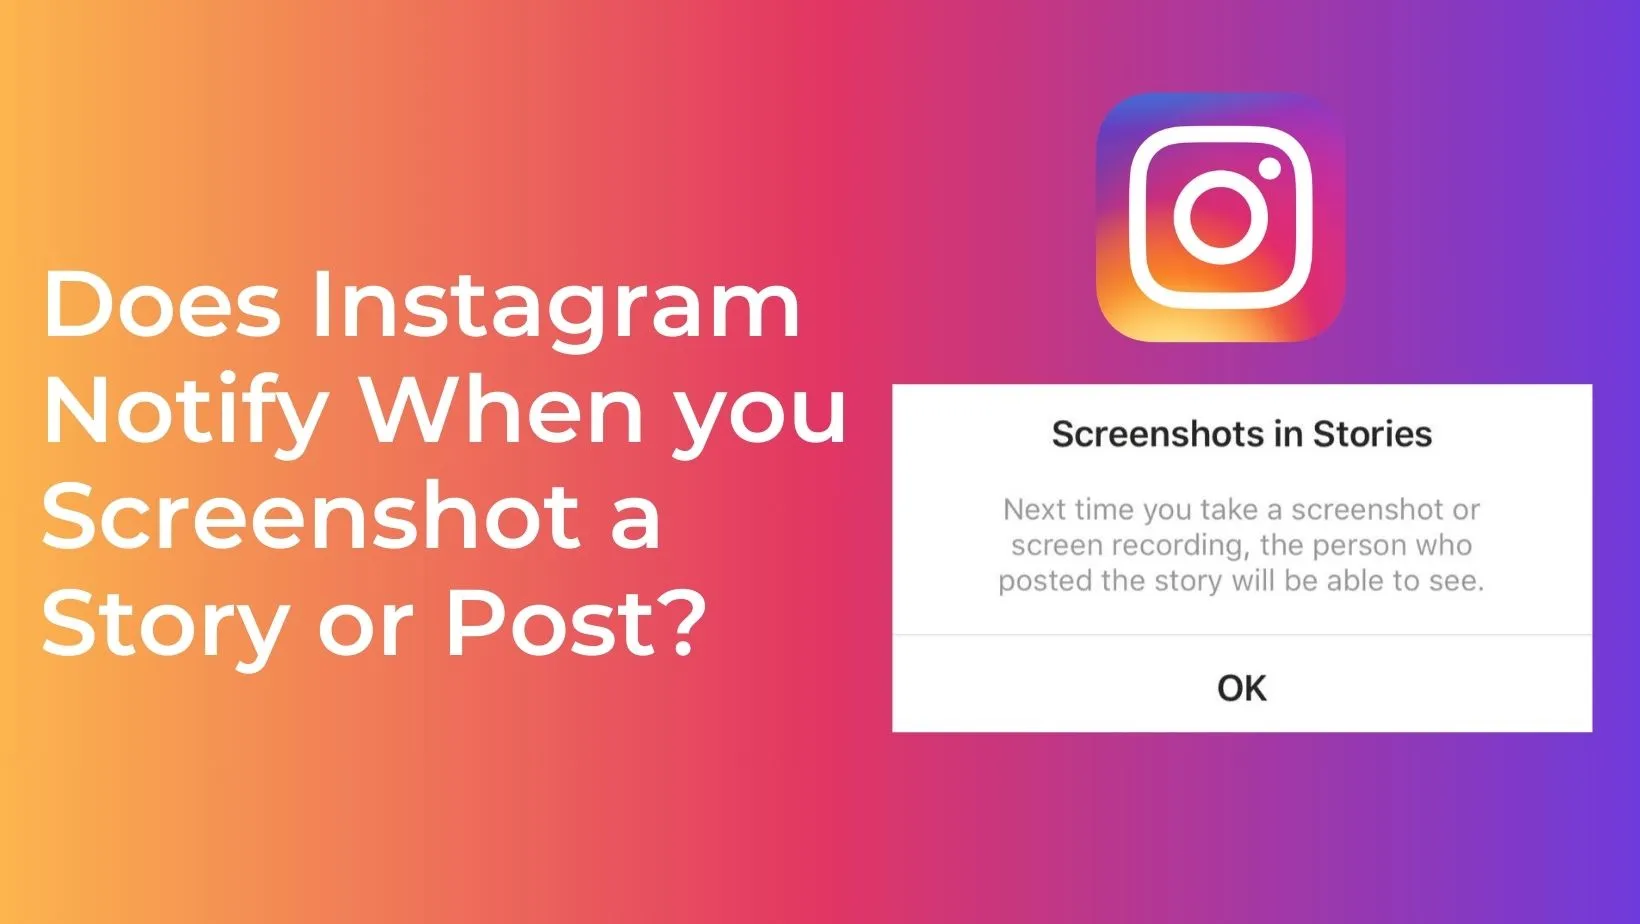 Does Instagram Notify When you Screenshot a Story or Post_